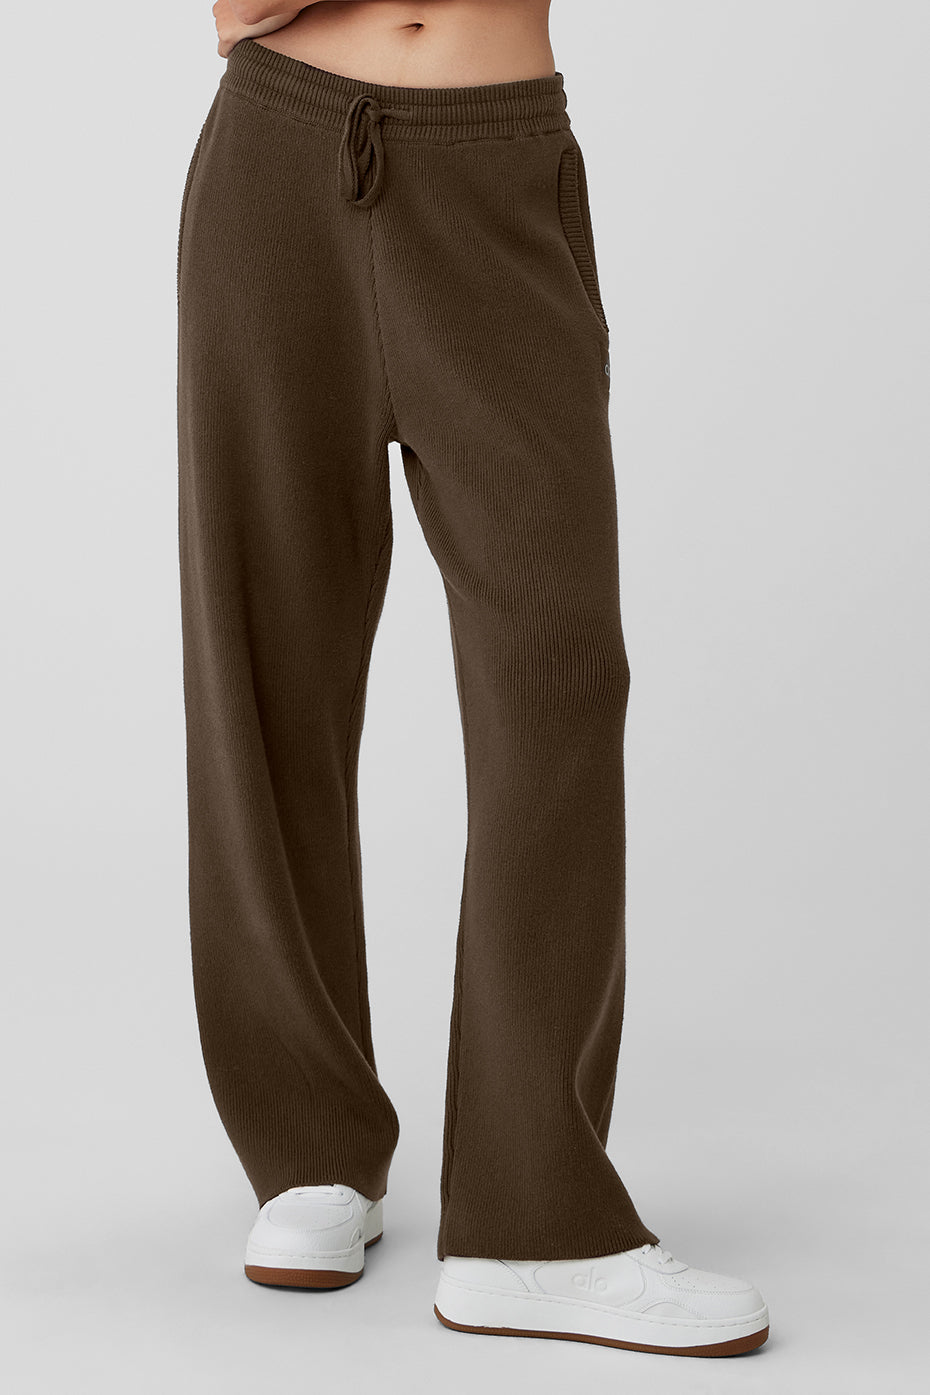 Aloyoga Accolade Straight Leg Sweatpant, Men's, Size S,New With